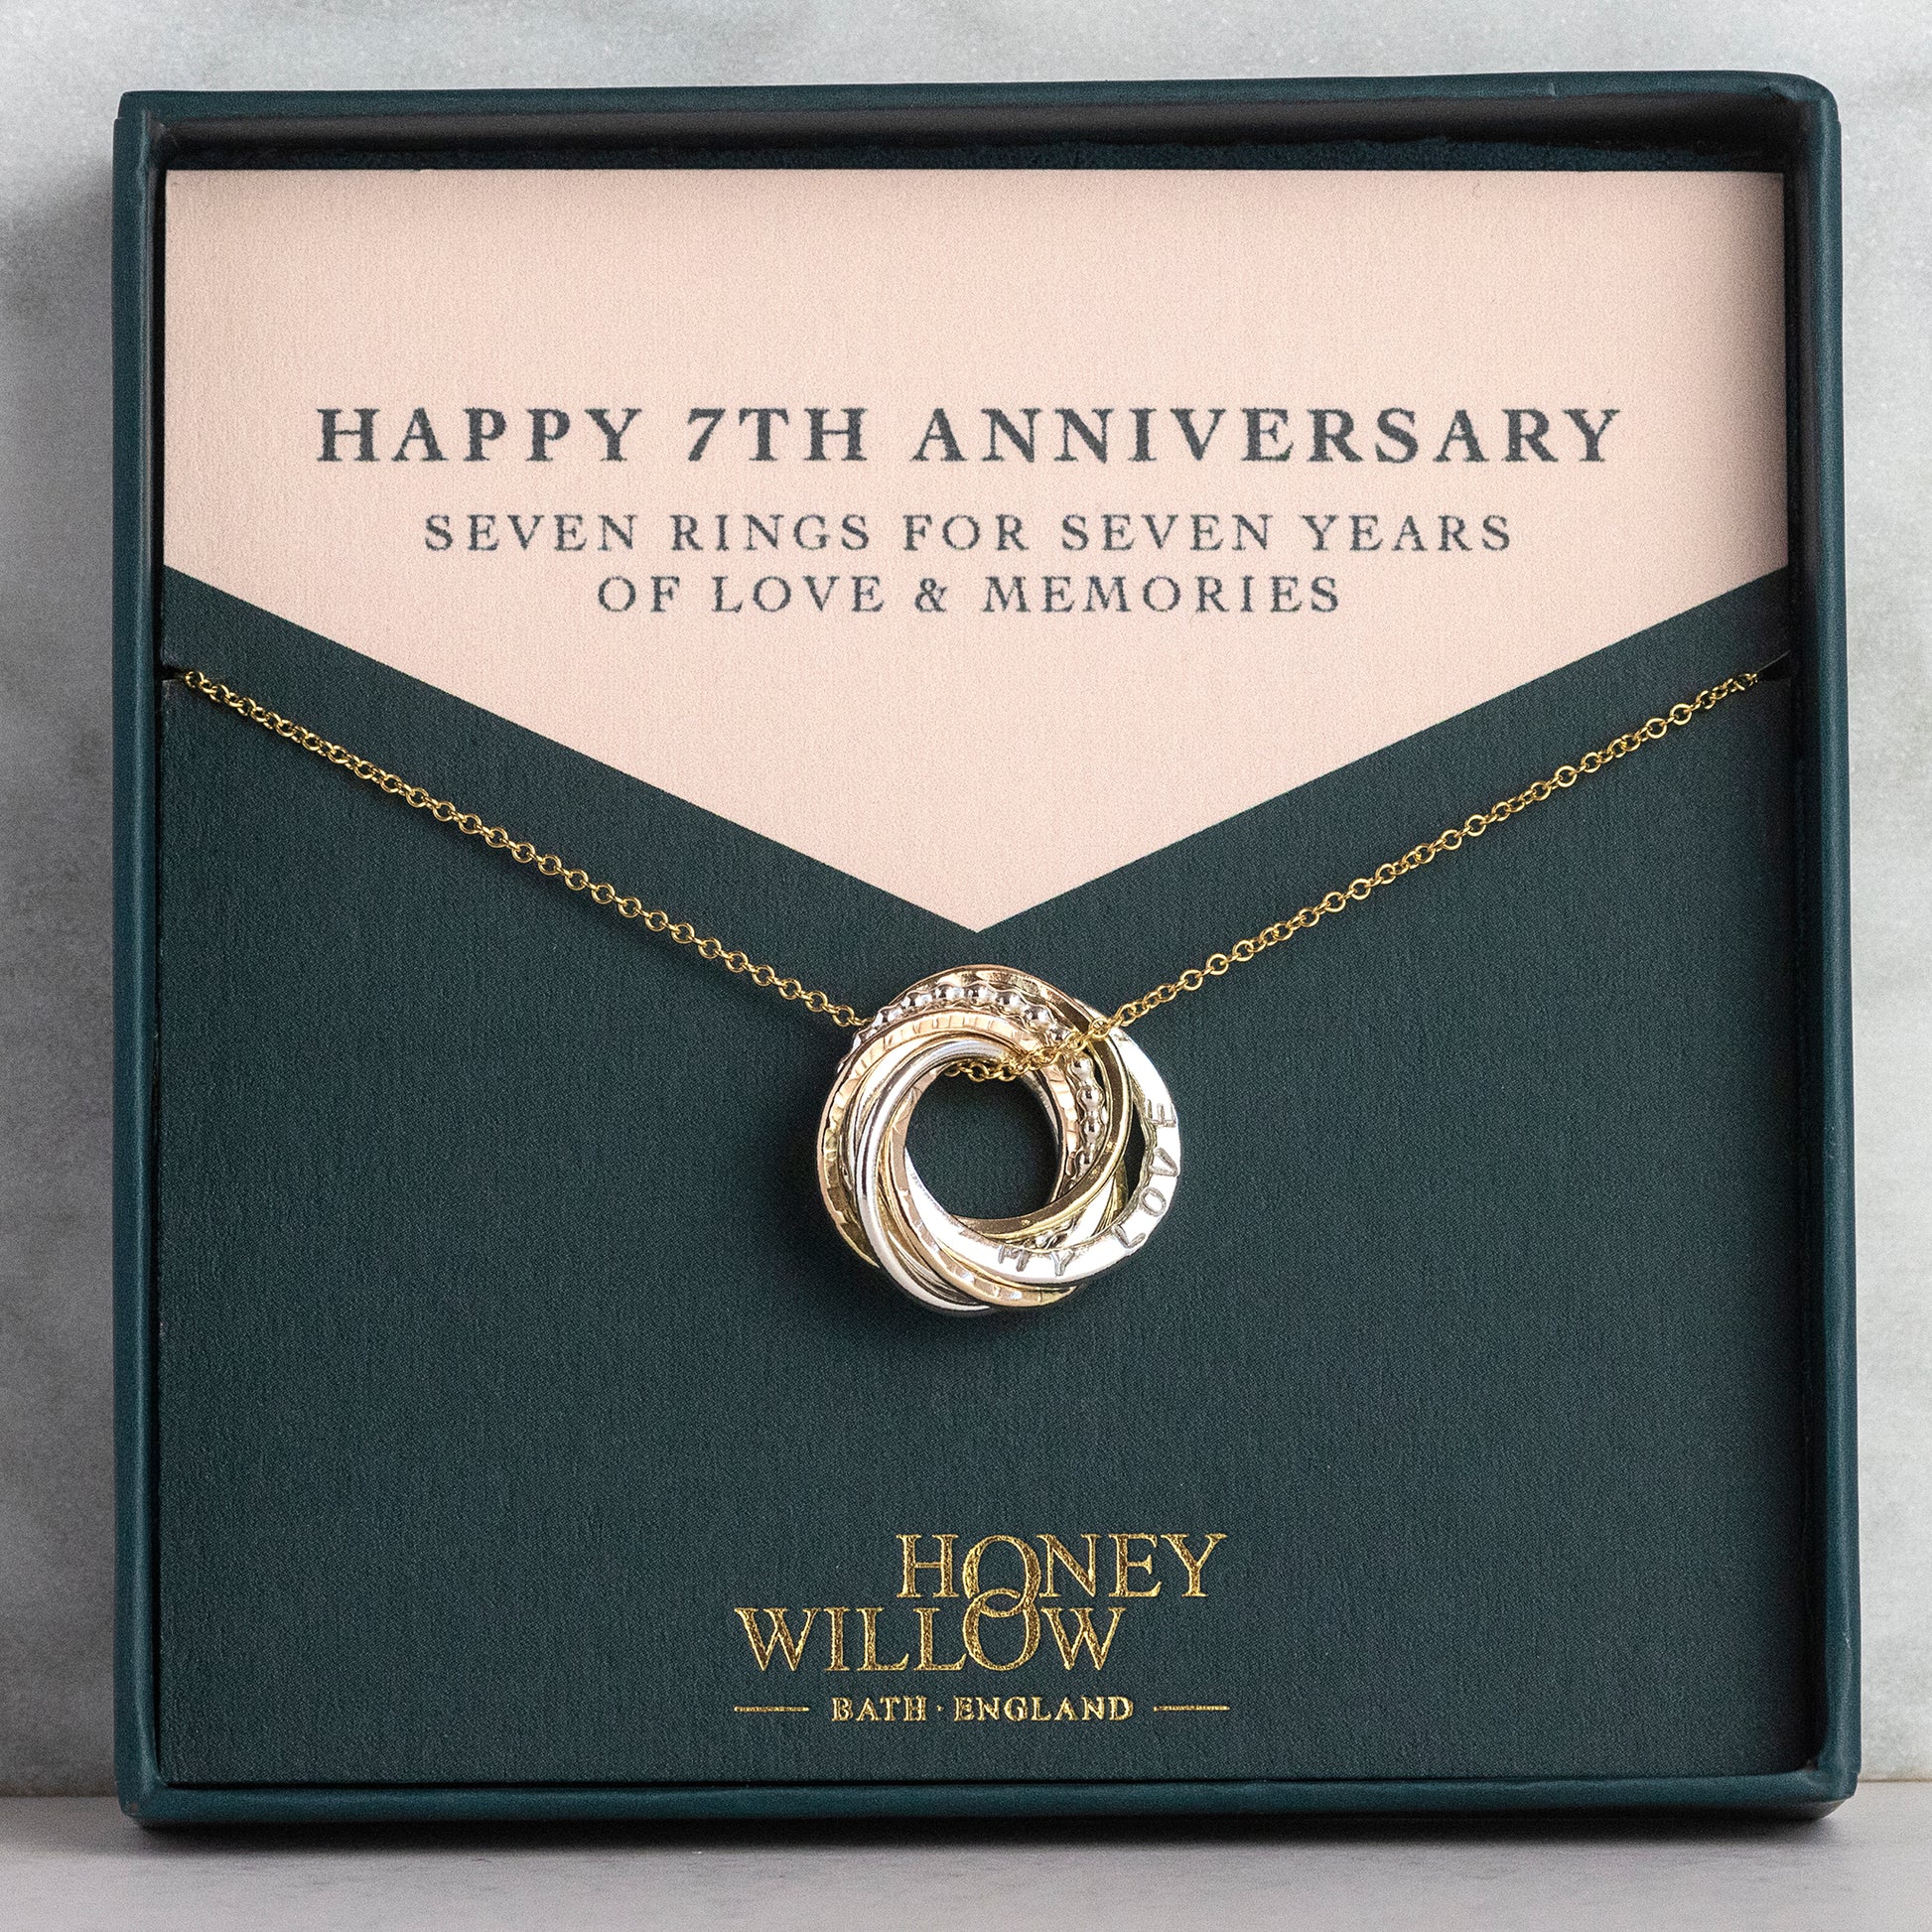 Personalised 7th Anniversary Necklace - Hand-Stamped - The Original 7 Rings for 7 Years Necklace - Petite Silver & Gold